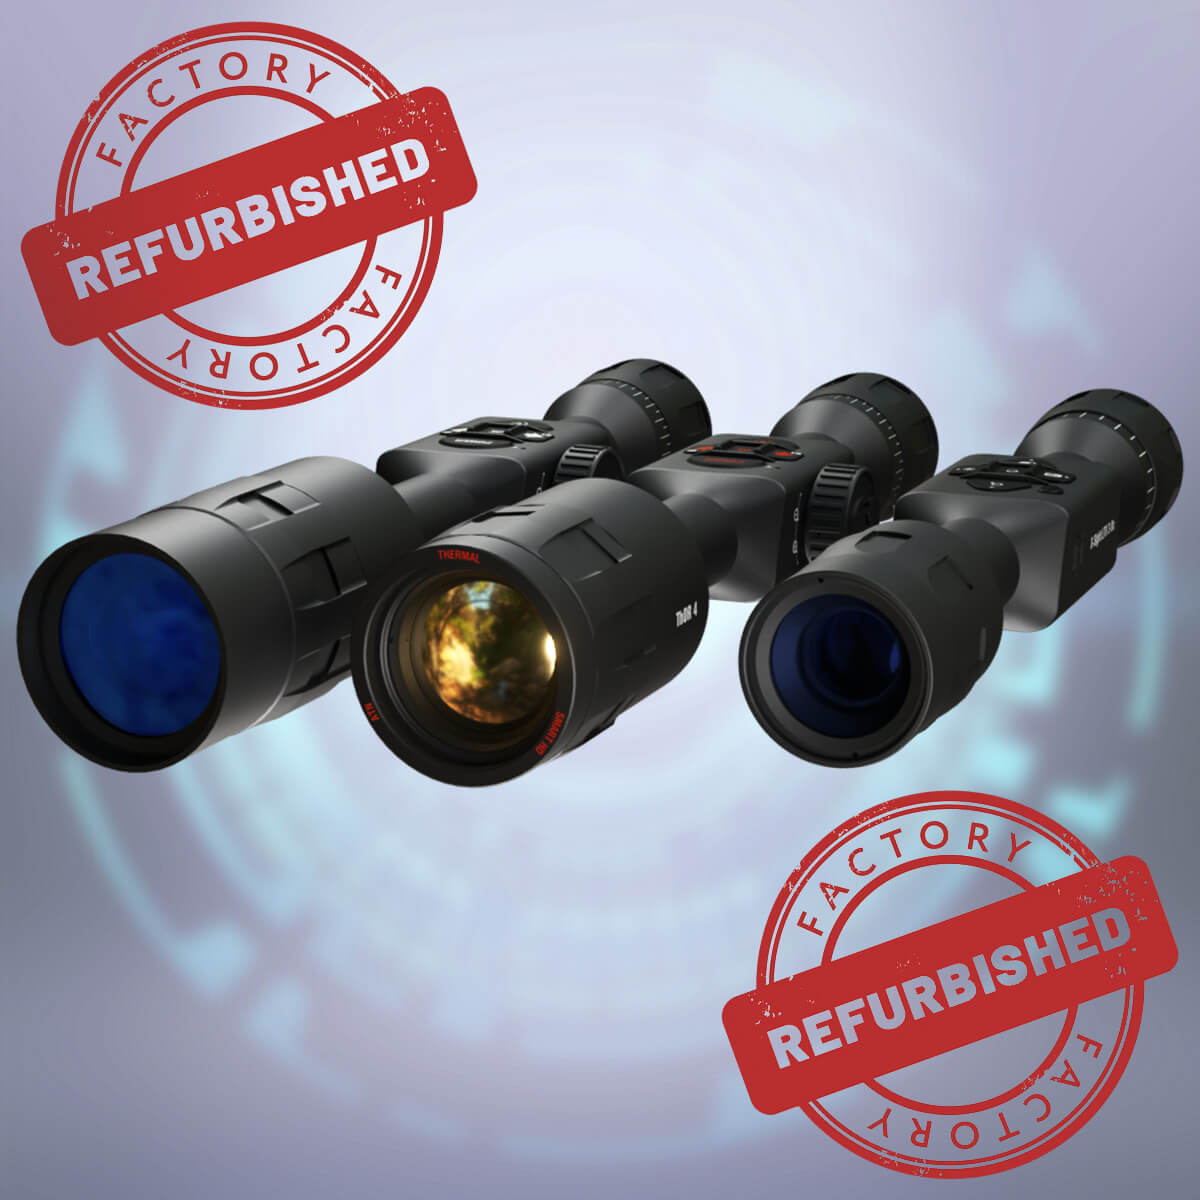 Refurbished Lenses: How to Find Demo, Used Spotting Scopes